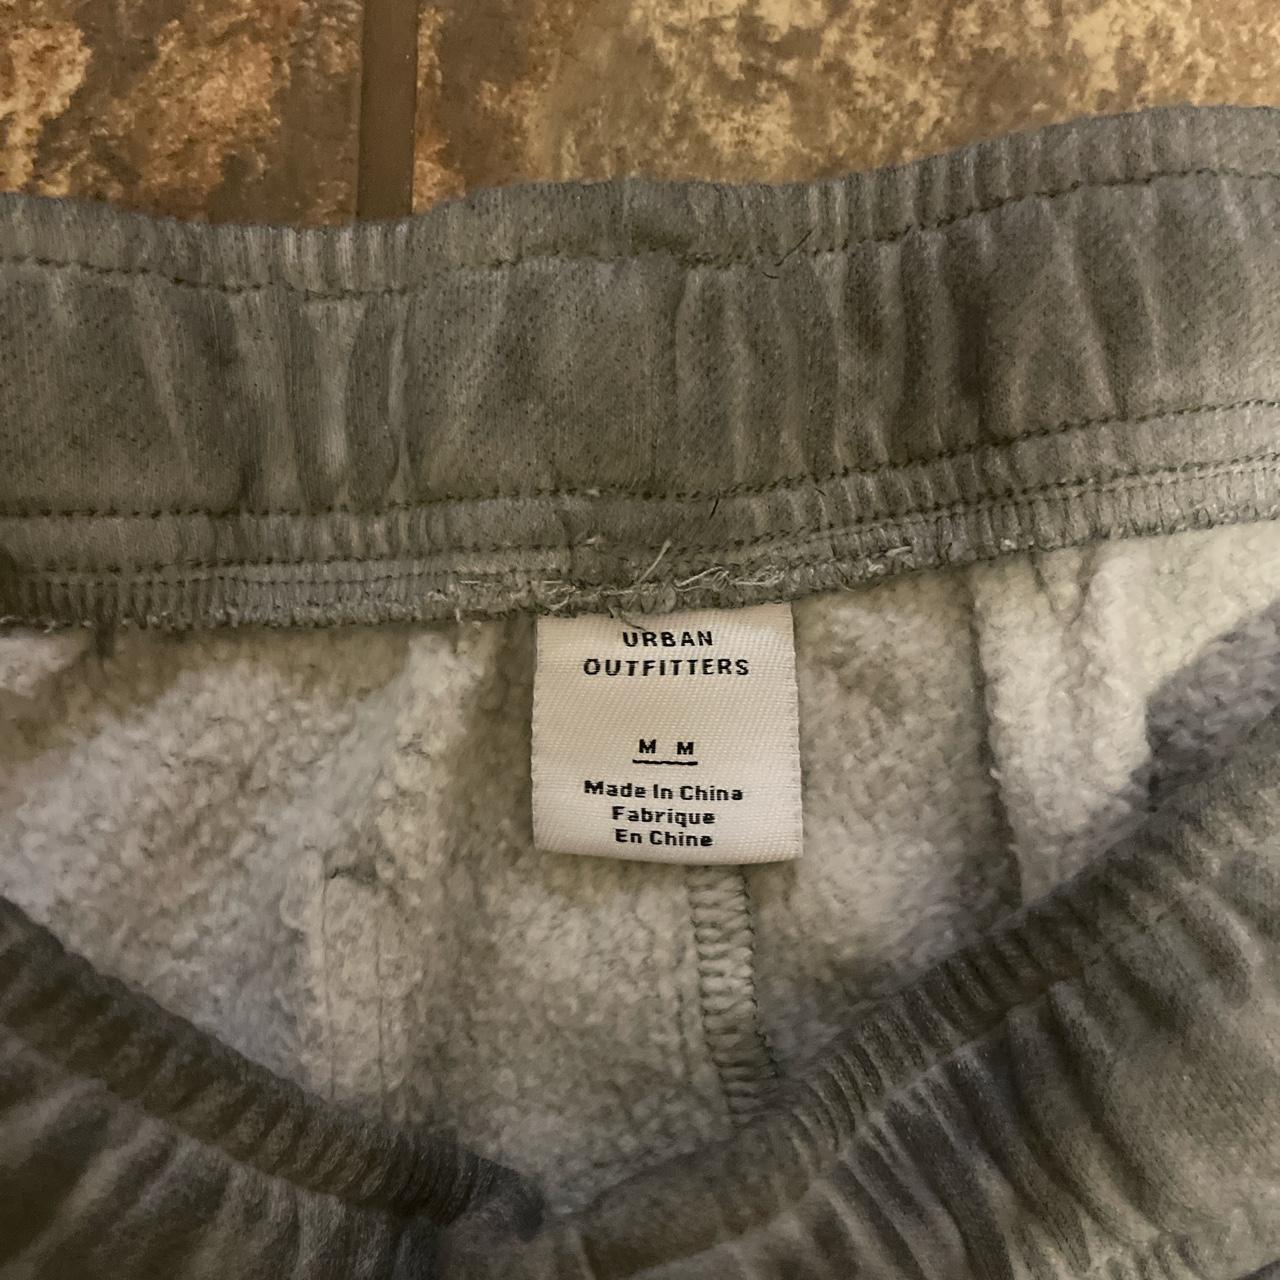 Urban Outfitters Sweatpants - Depop